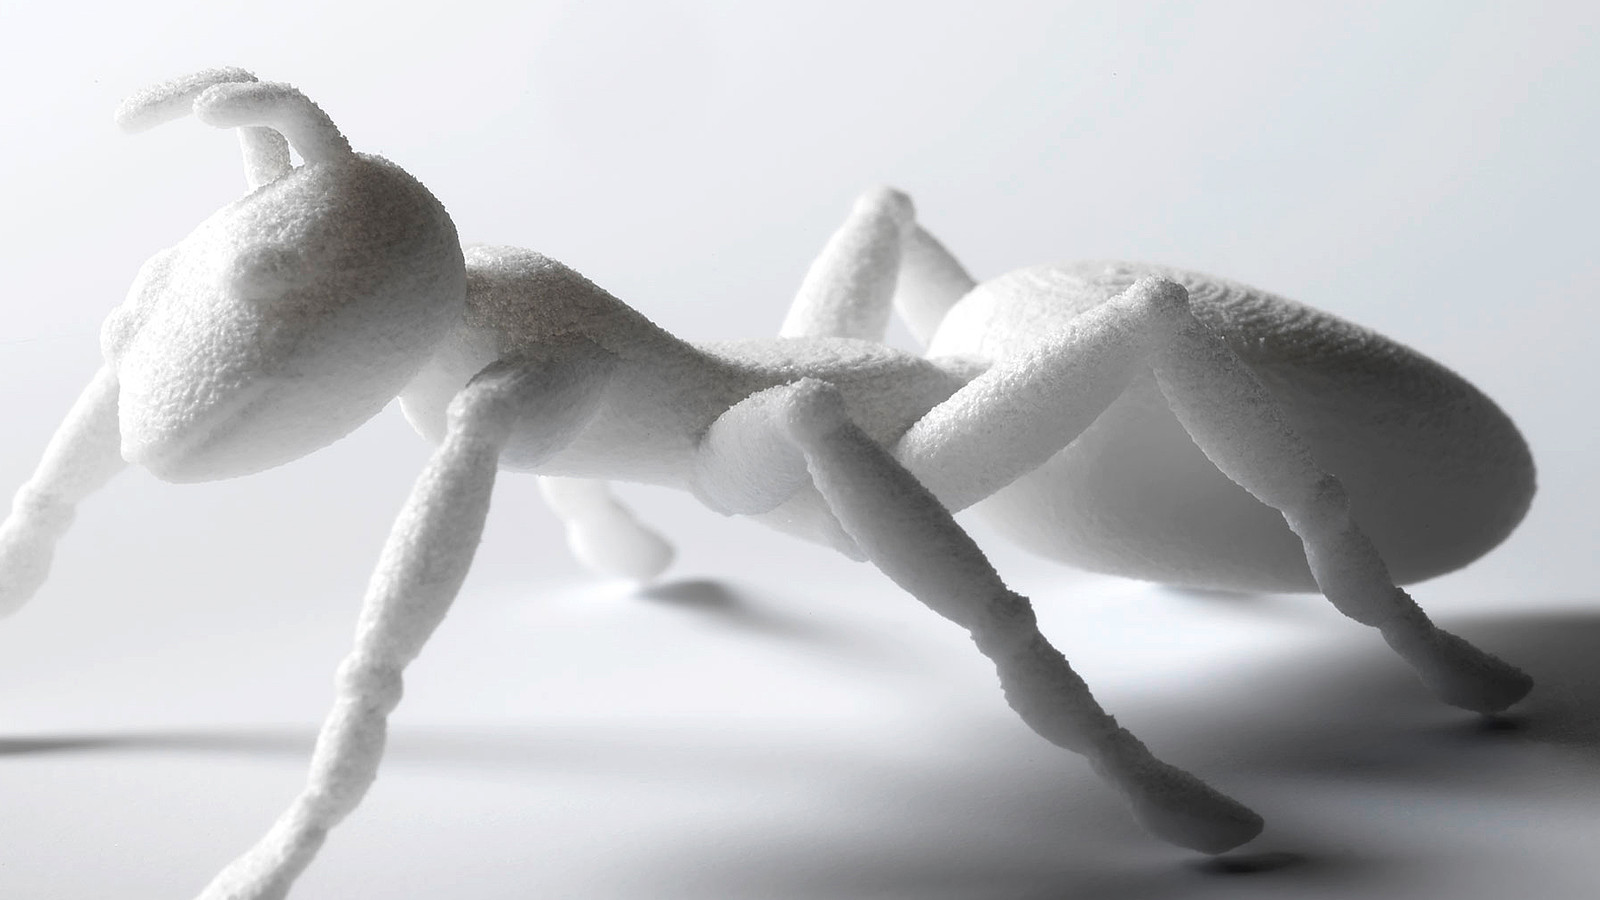 This image shows how delicate and precise 3D printing technology can be when it is used to create an ant. 